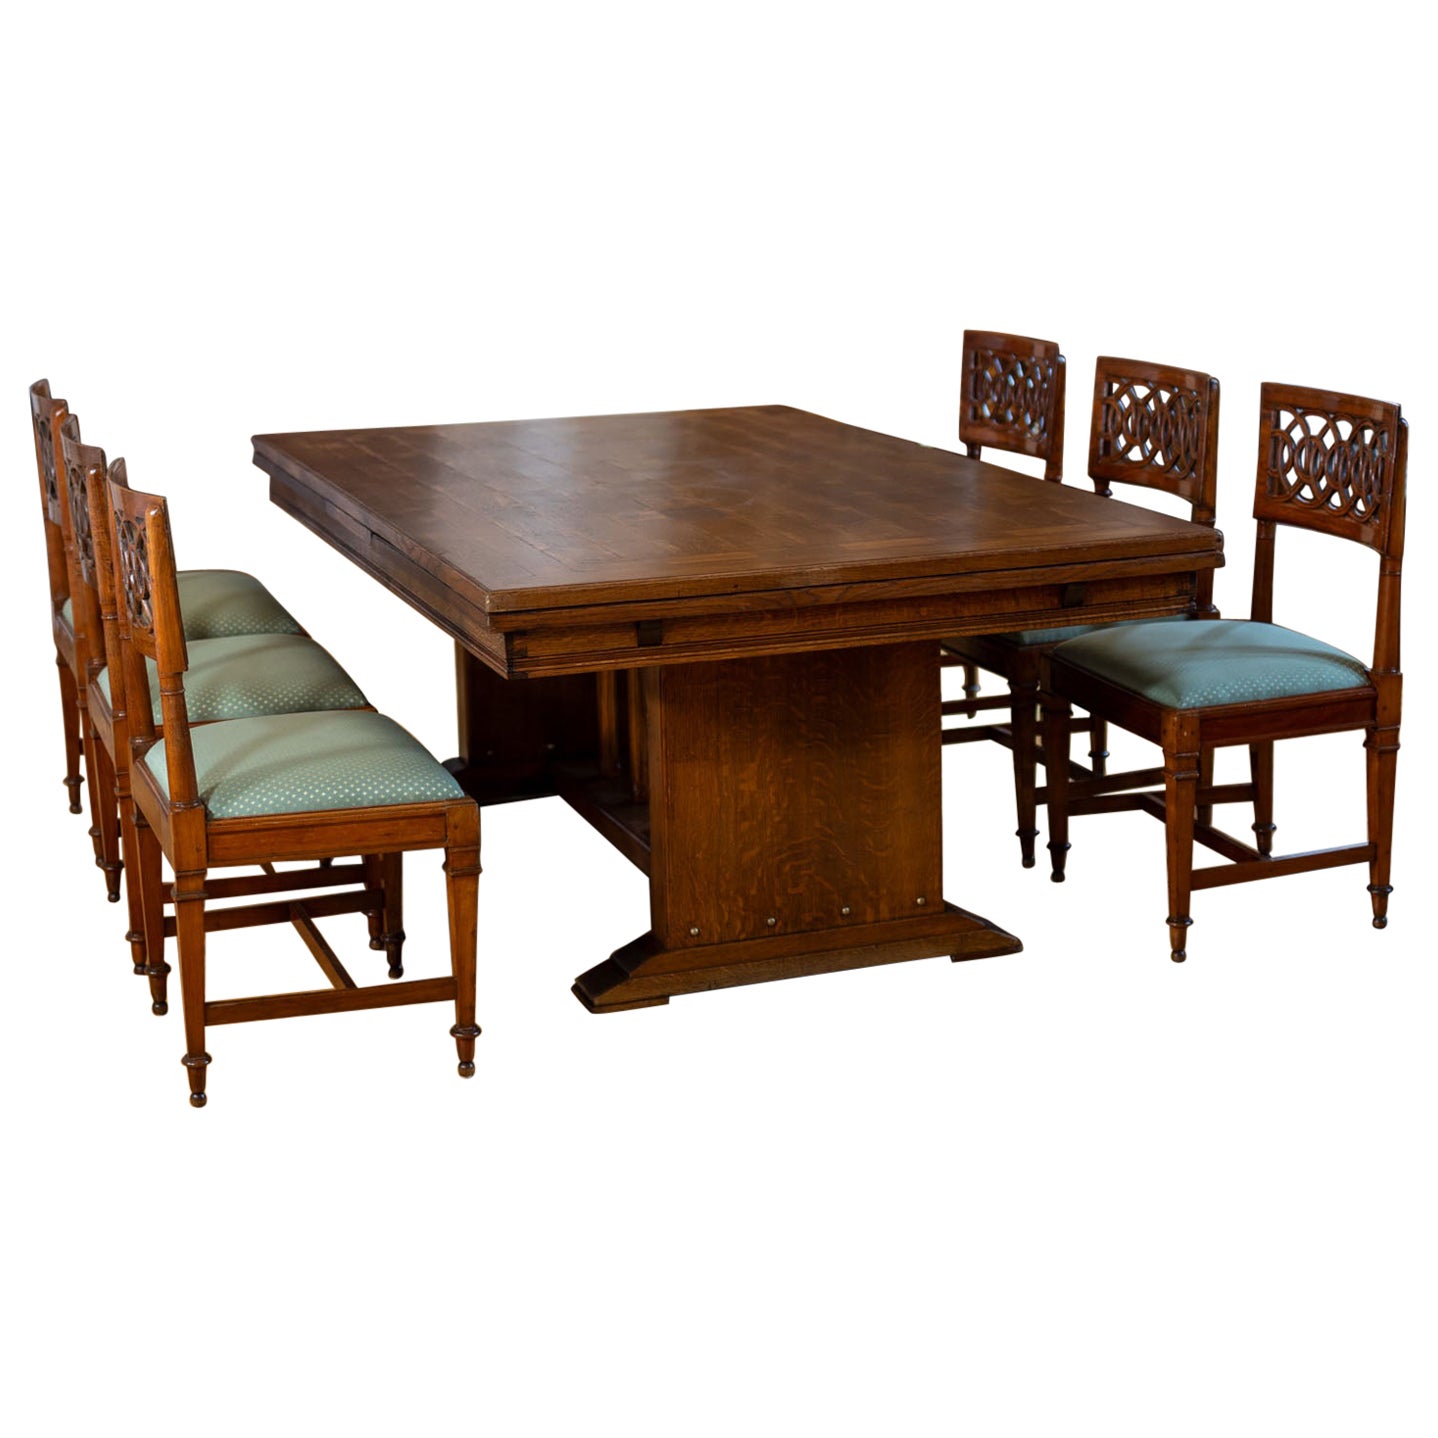 Large Art Nouveau Extension Table in Oak, Early 20th Century For Sale